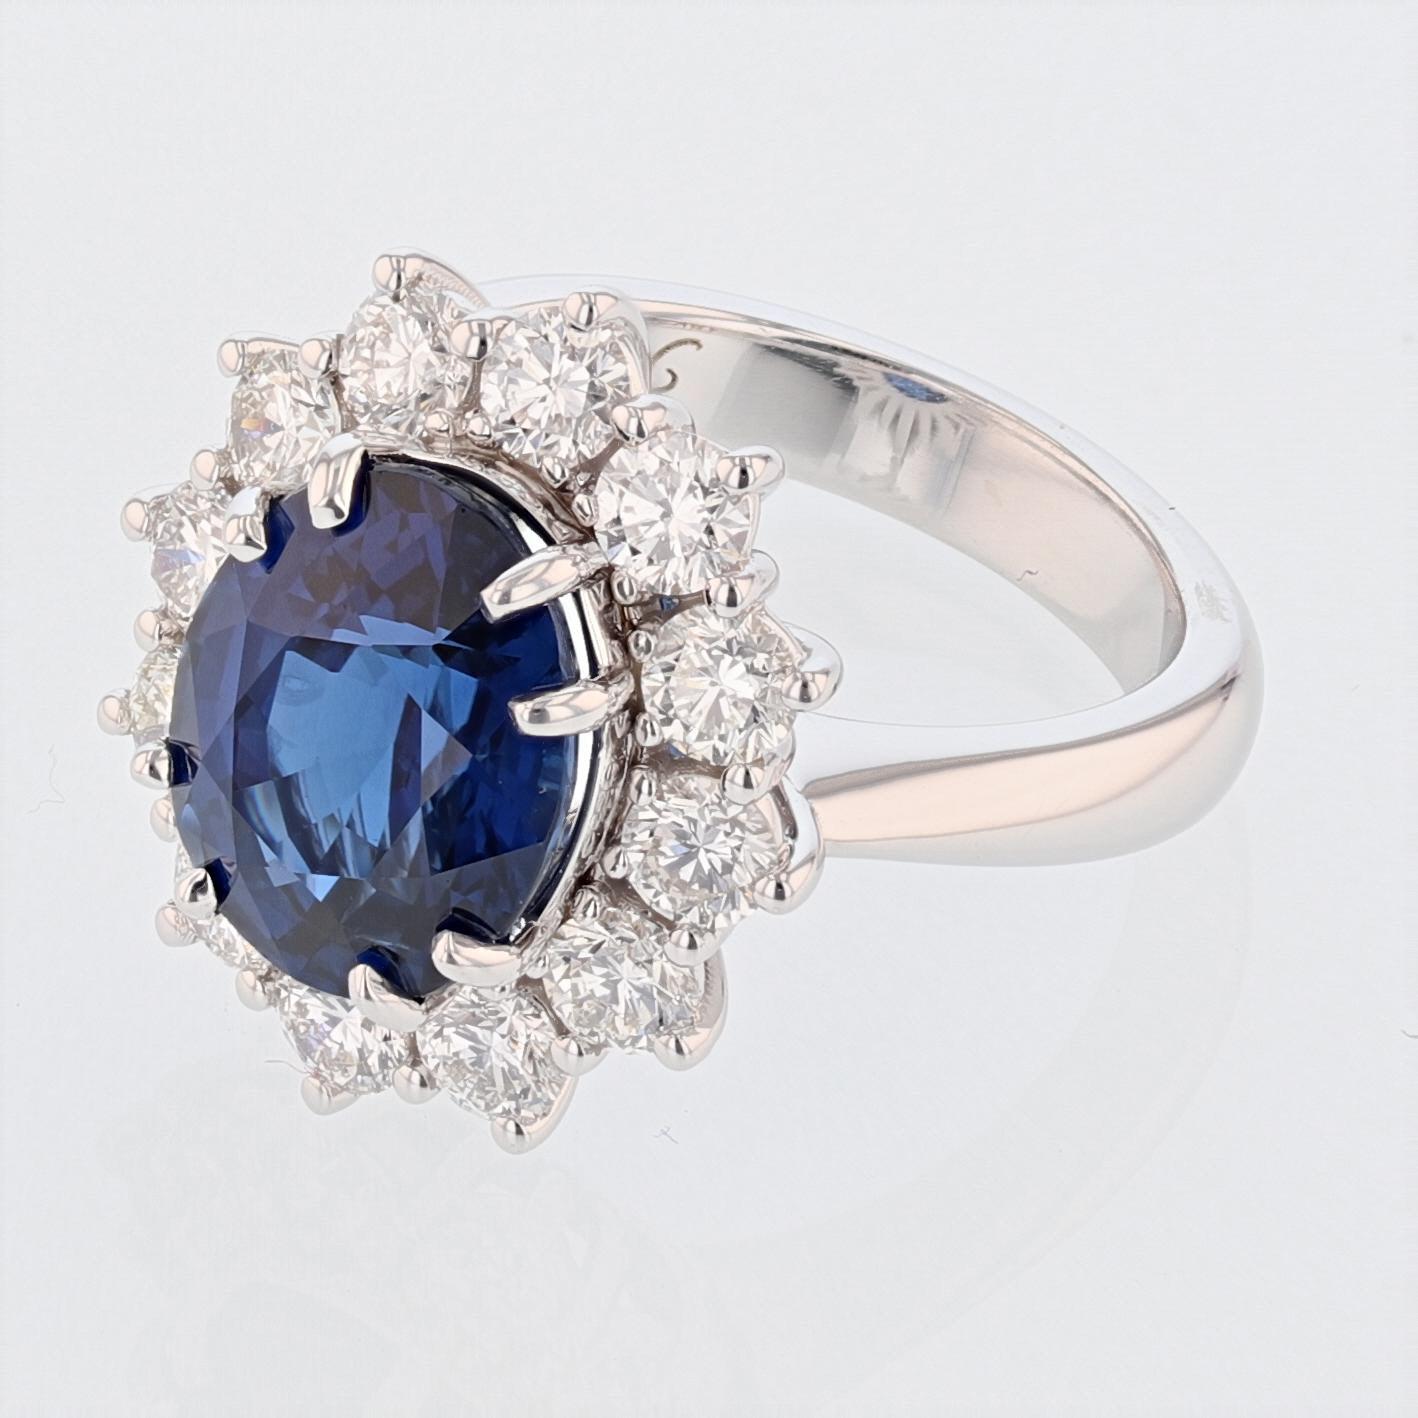 This ring is made in 18k white gold and features a GRS certified, vivid blue, oval cut sapphire weighing 6.46ct. The certificate number is GRS2015-034115. The ring also has a diamond halo featuring 12 round cut diamonds weiging 1.82ct color grade